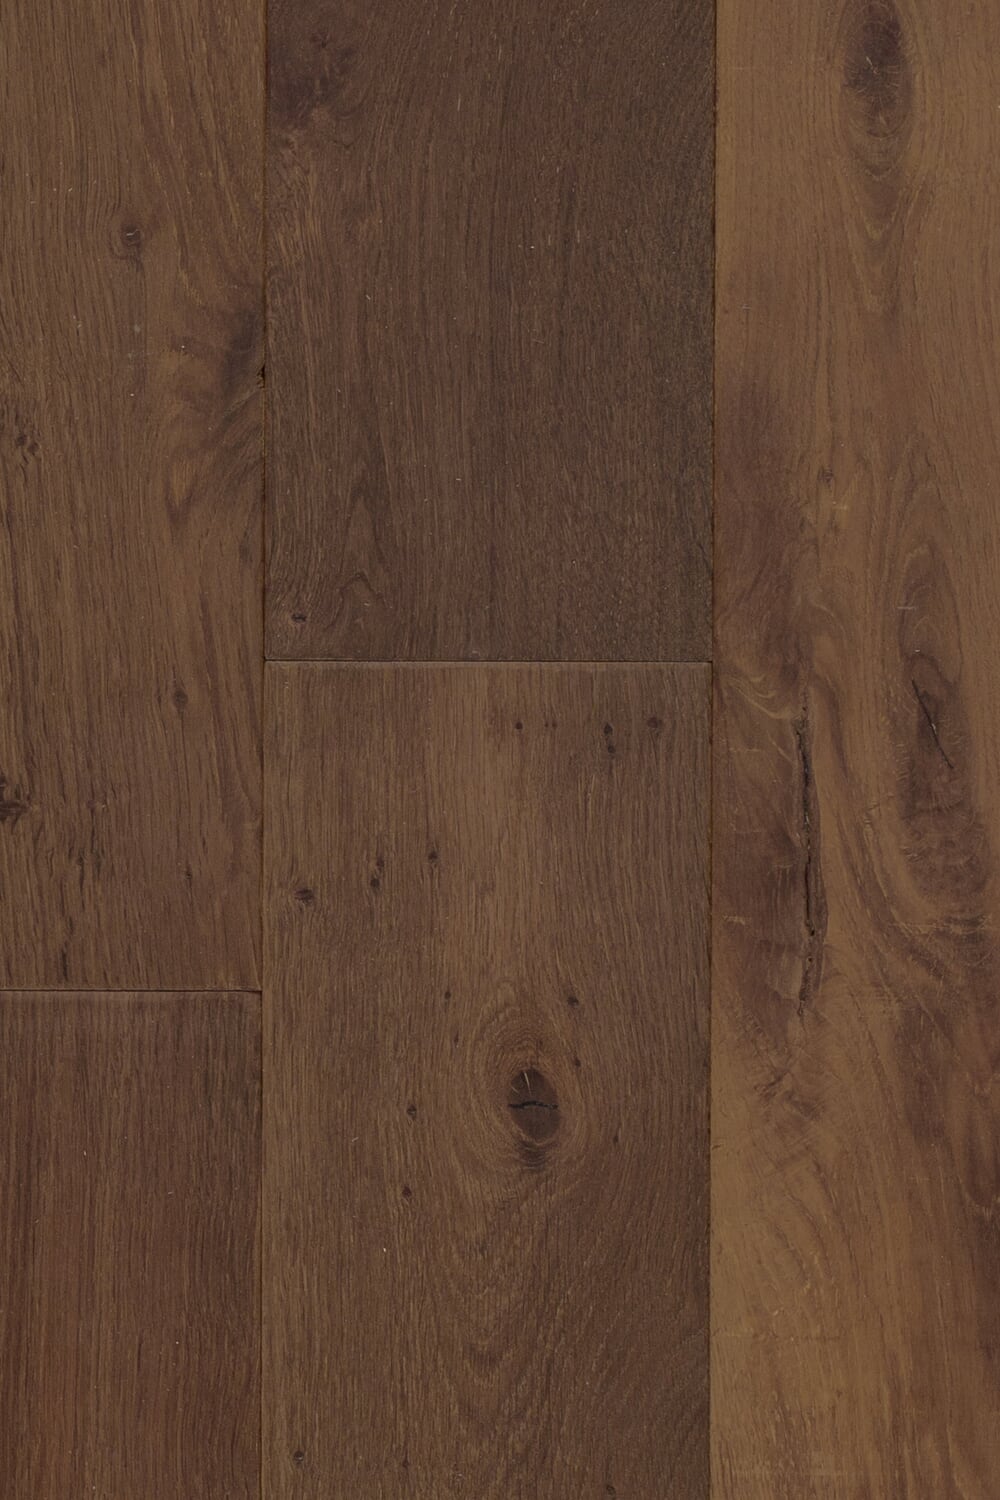 Fine 180mm Wide Engineered Aged Oak Wood Flooring With A Smoked